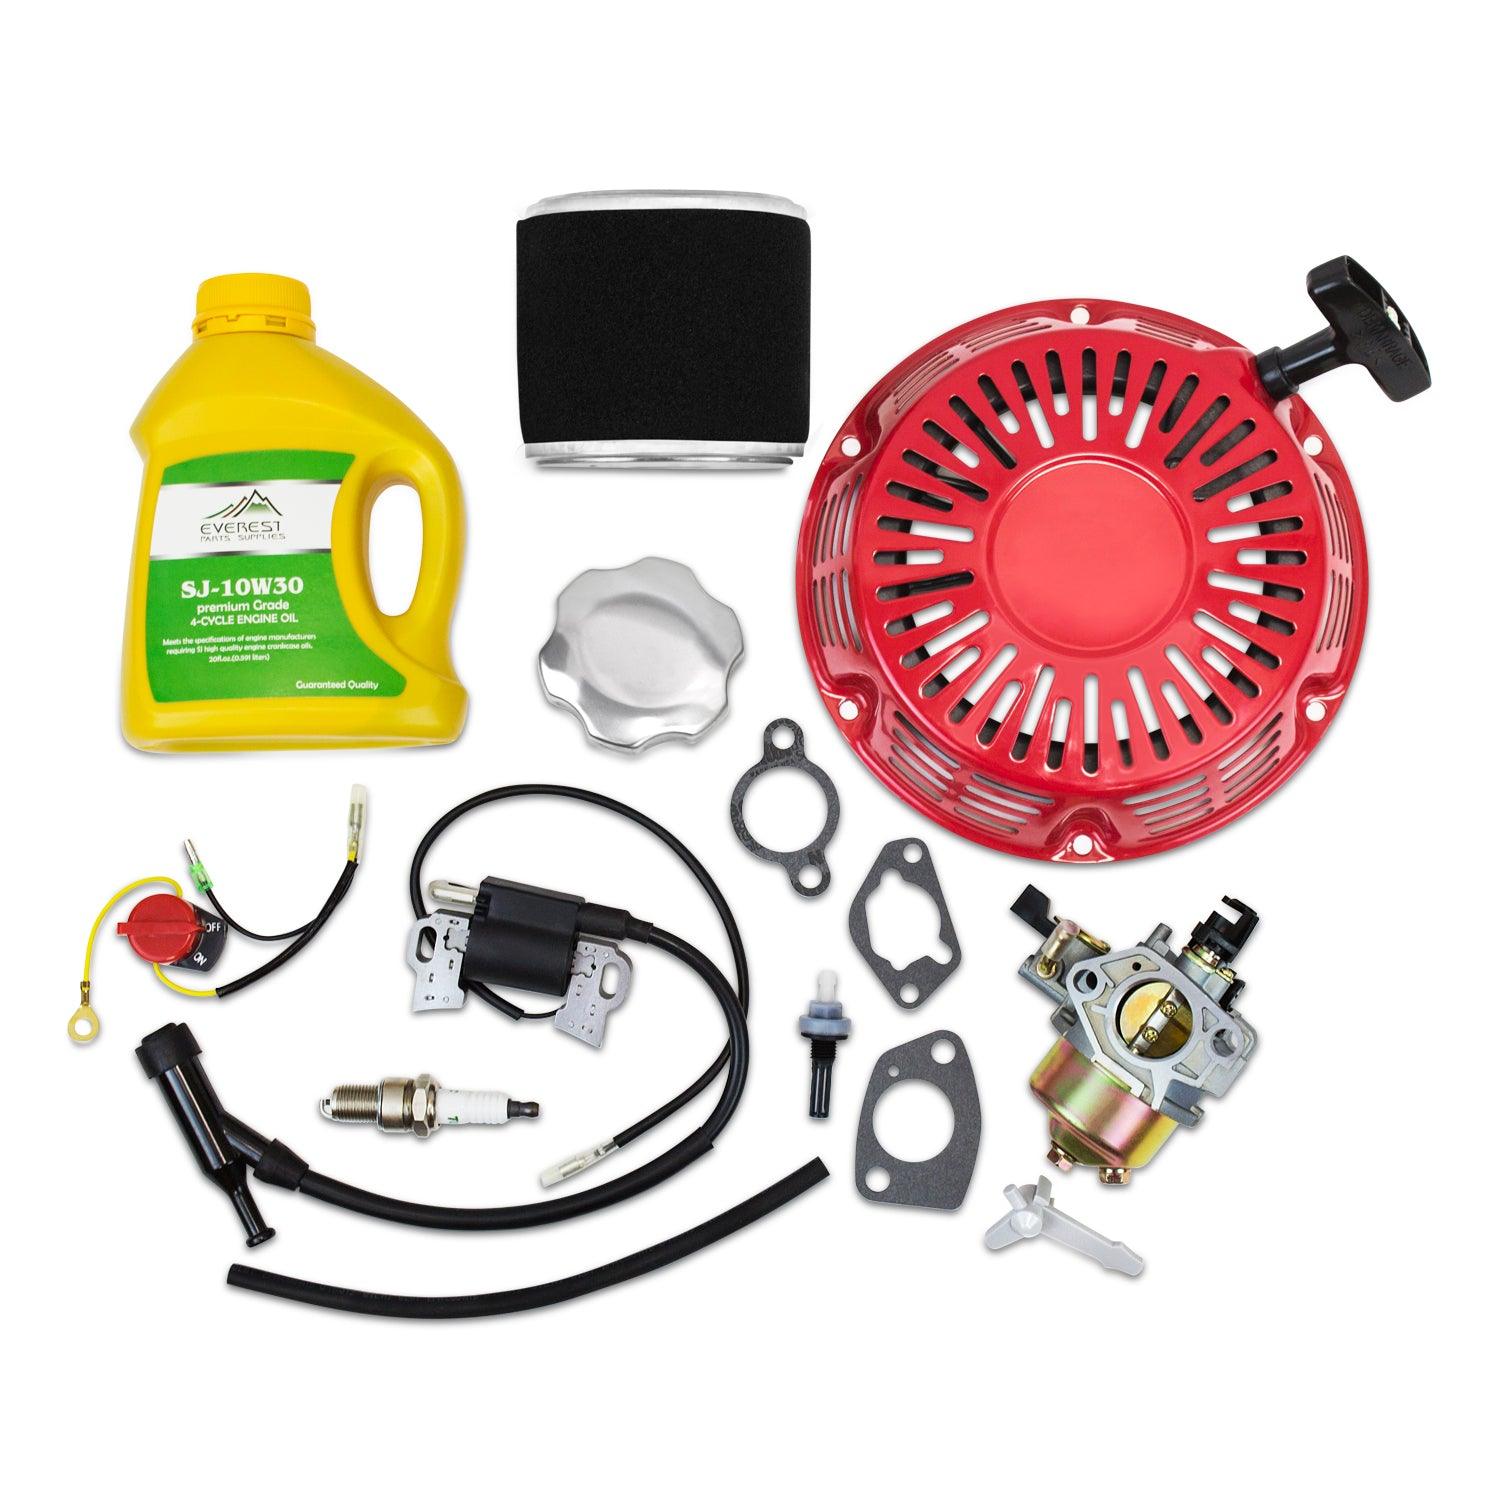 Tune up Kit fits Honda GX340, GX390 with Carburetor, Recoil, Ignition Coil, Spark Plug, Air Filter